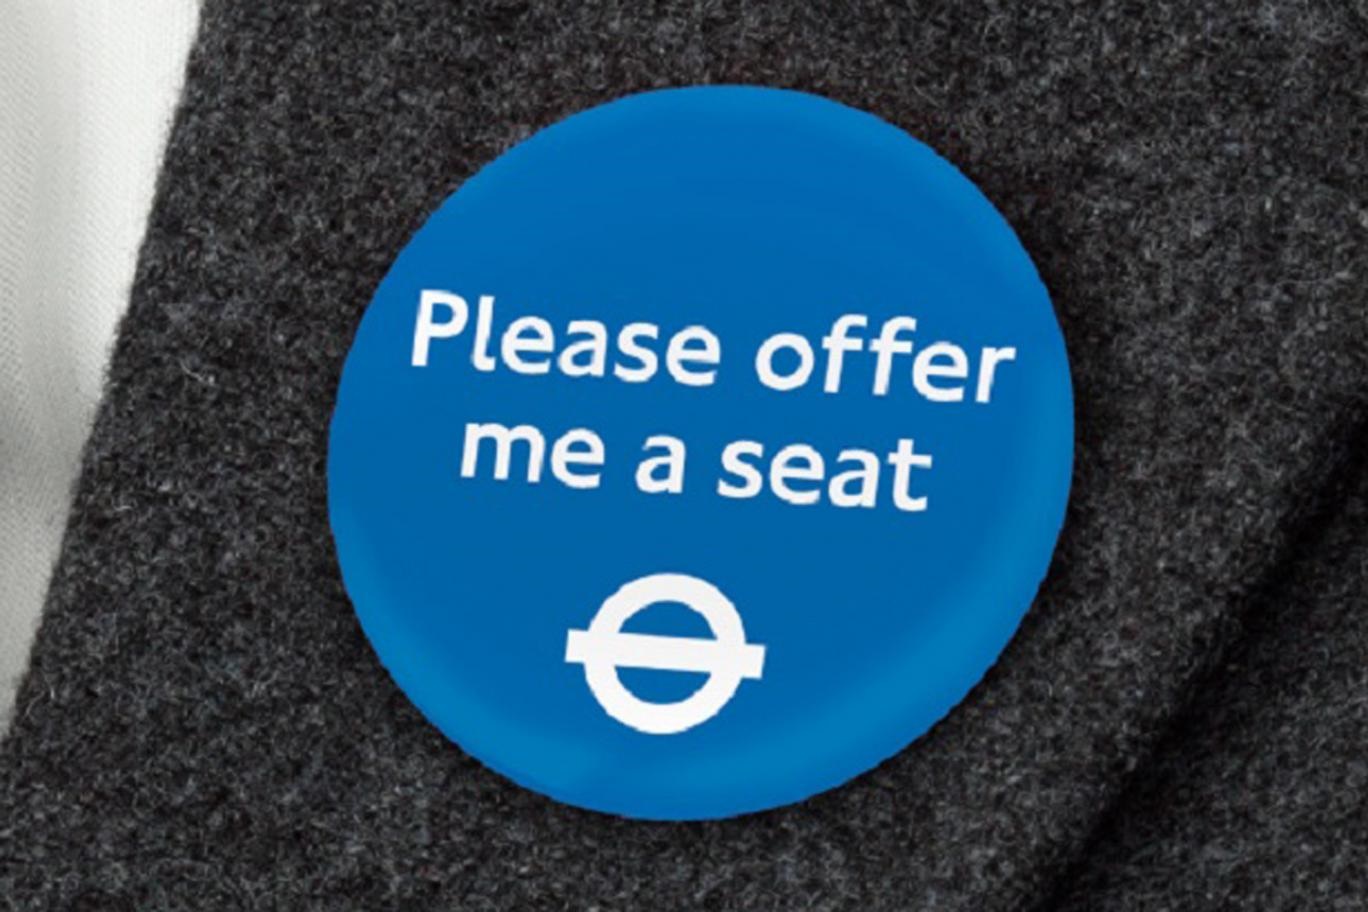 TfL’s badge for disabled passengers to be rolled out permanently